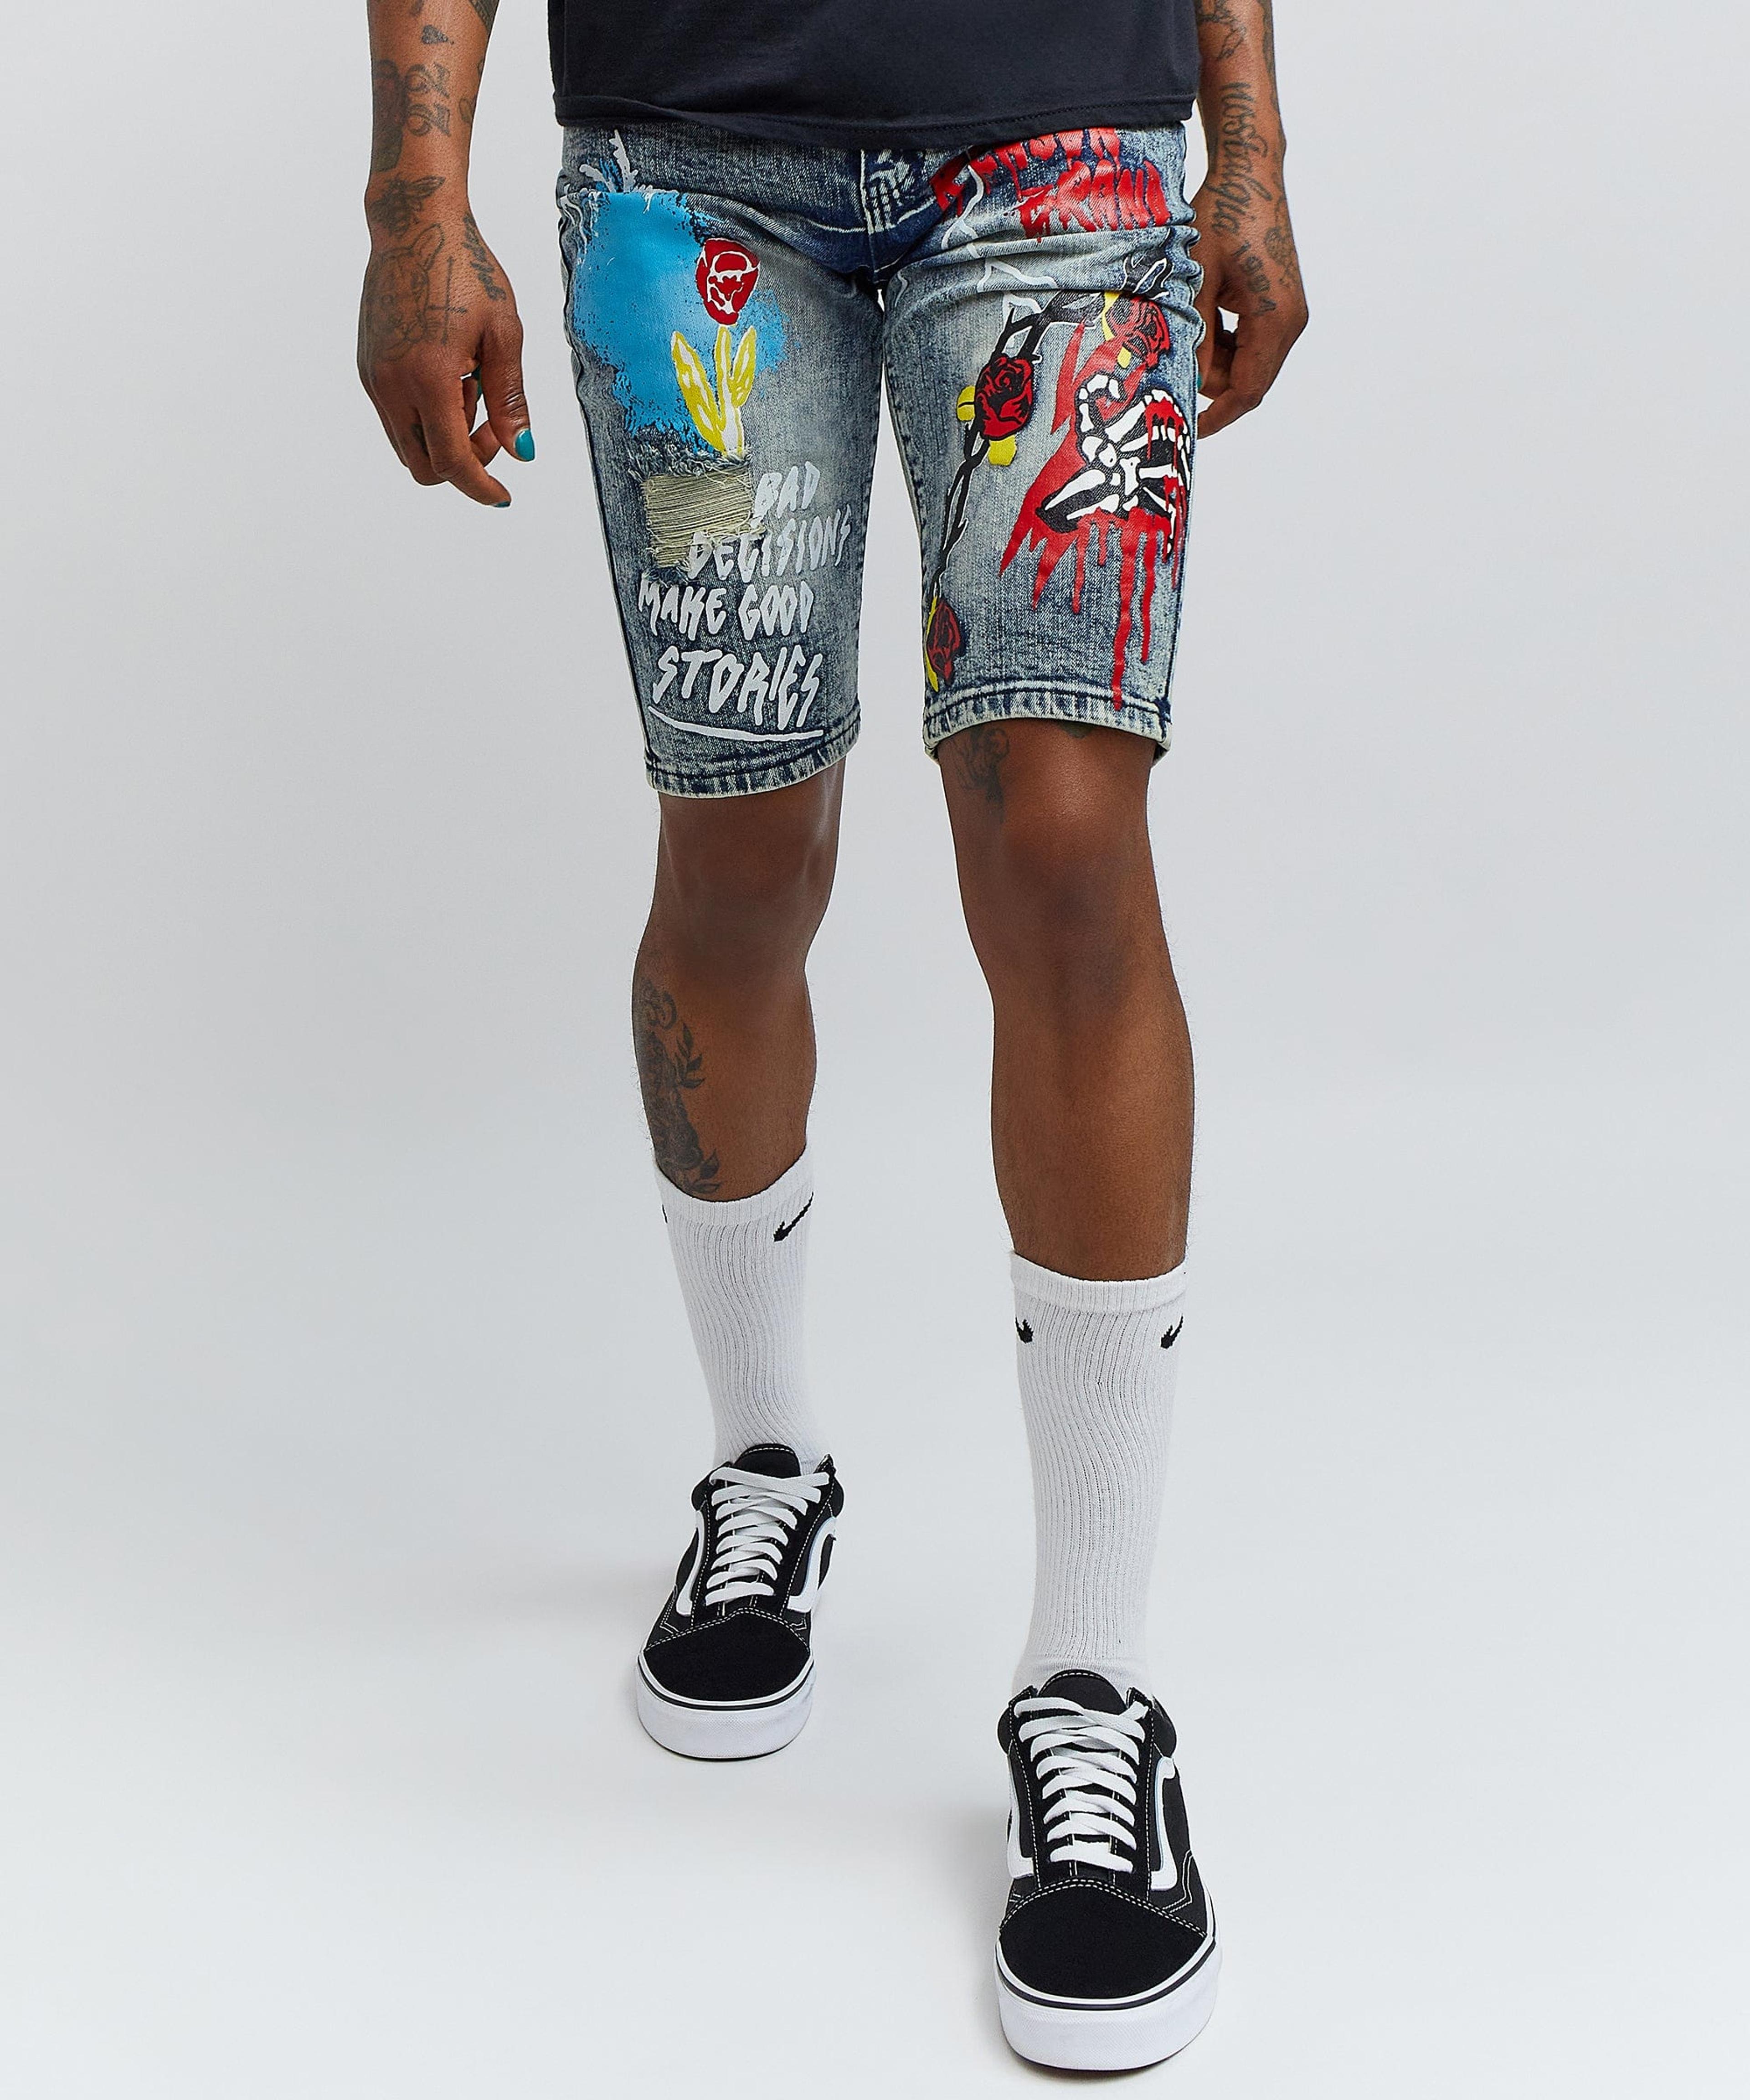 Move In Silence Graphic Print Jean Shorts